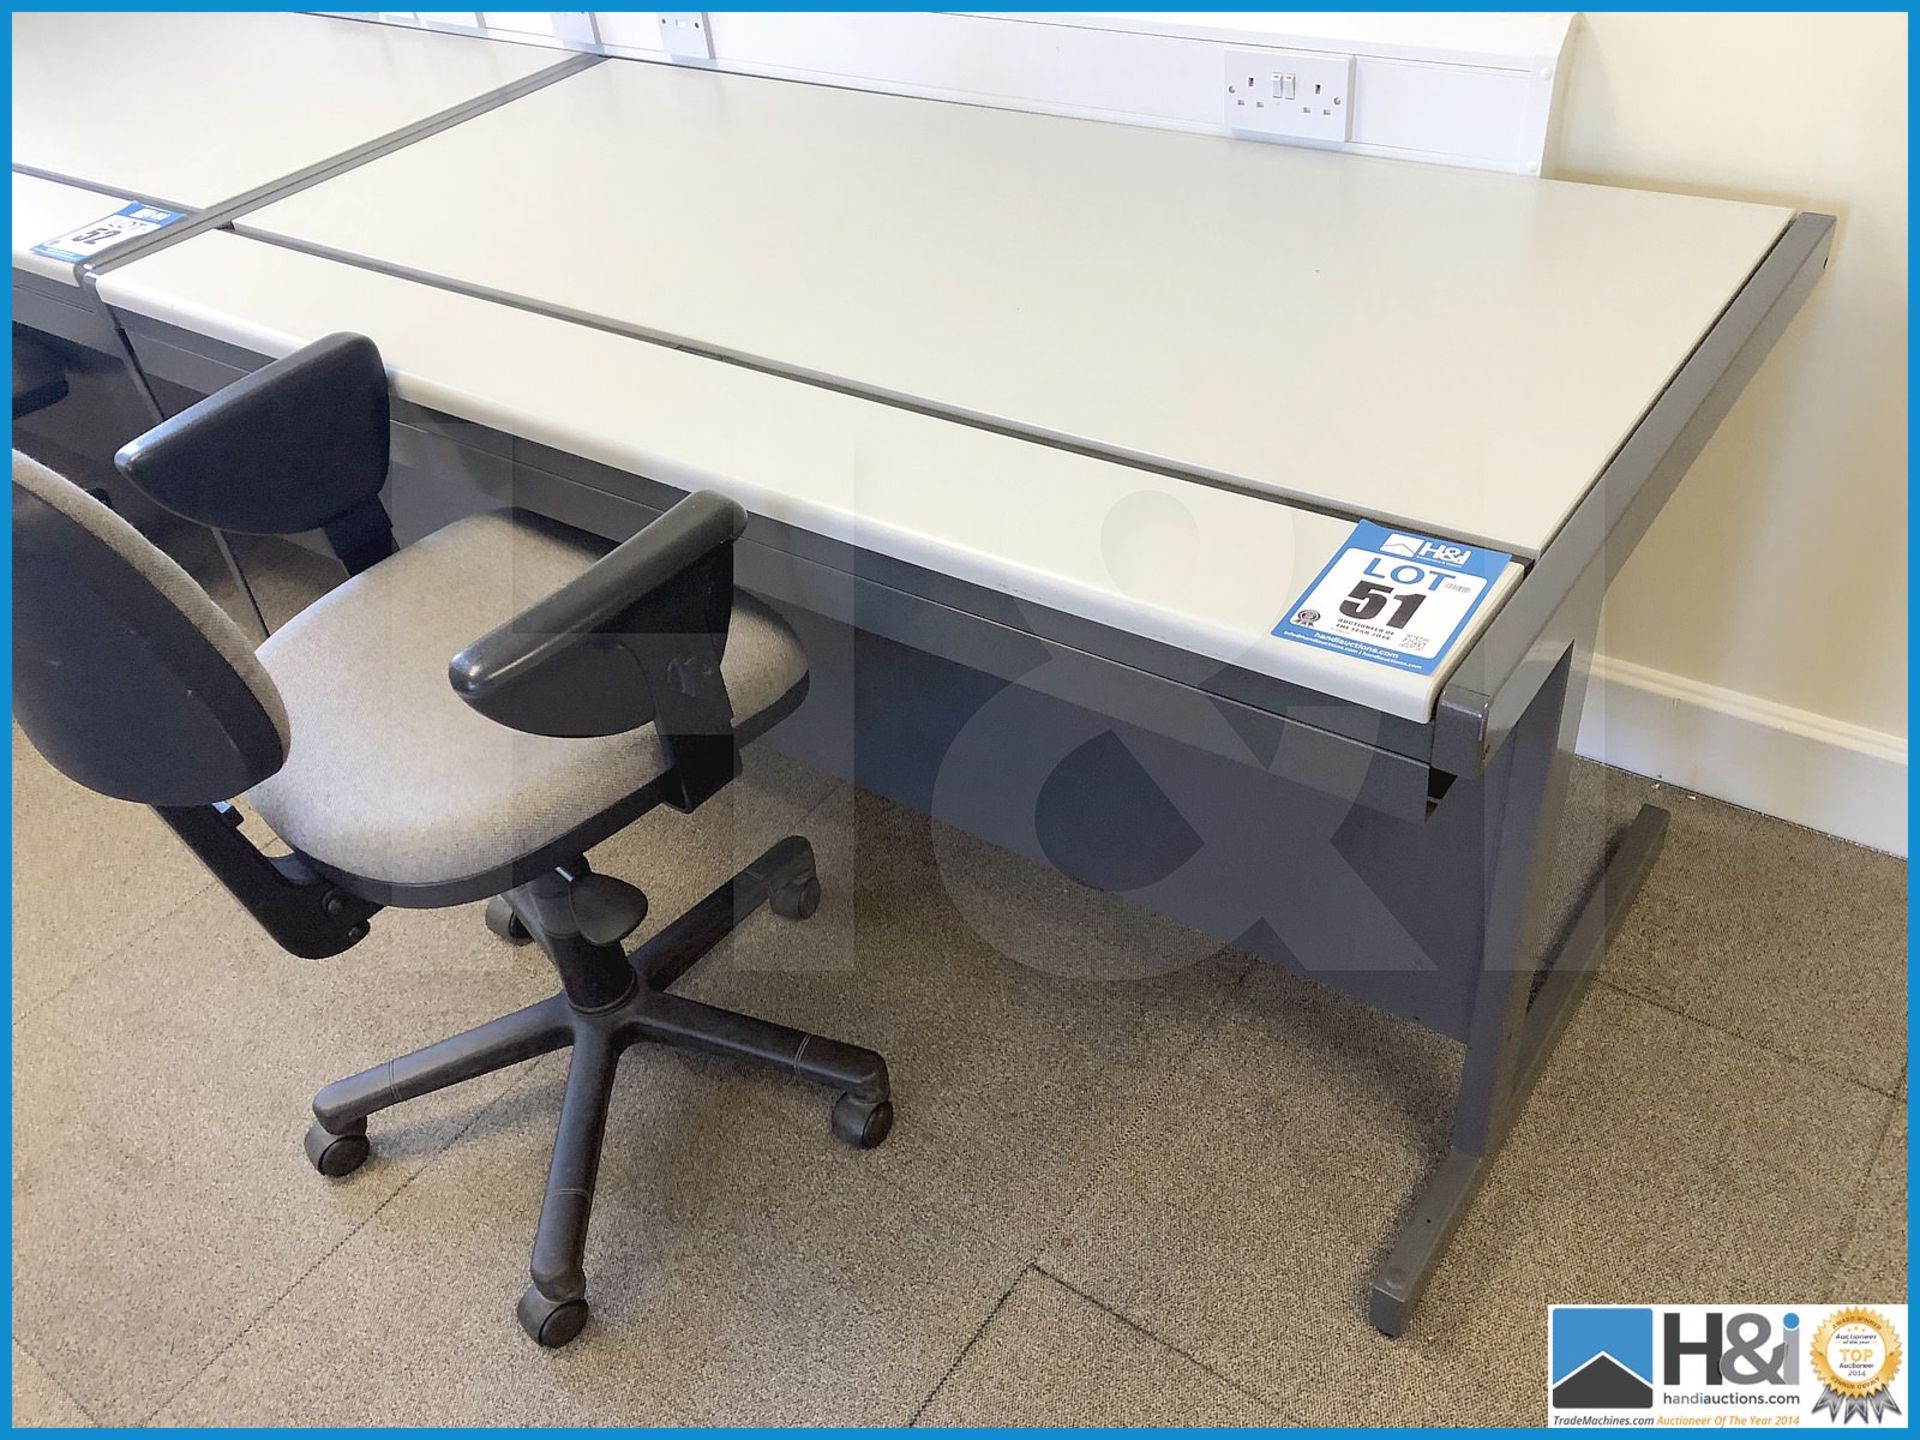 Excellent Project metal framed office desk with rear lift up cable tidy section. Presented in excell - Image 2 of 2